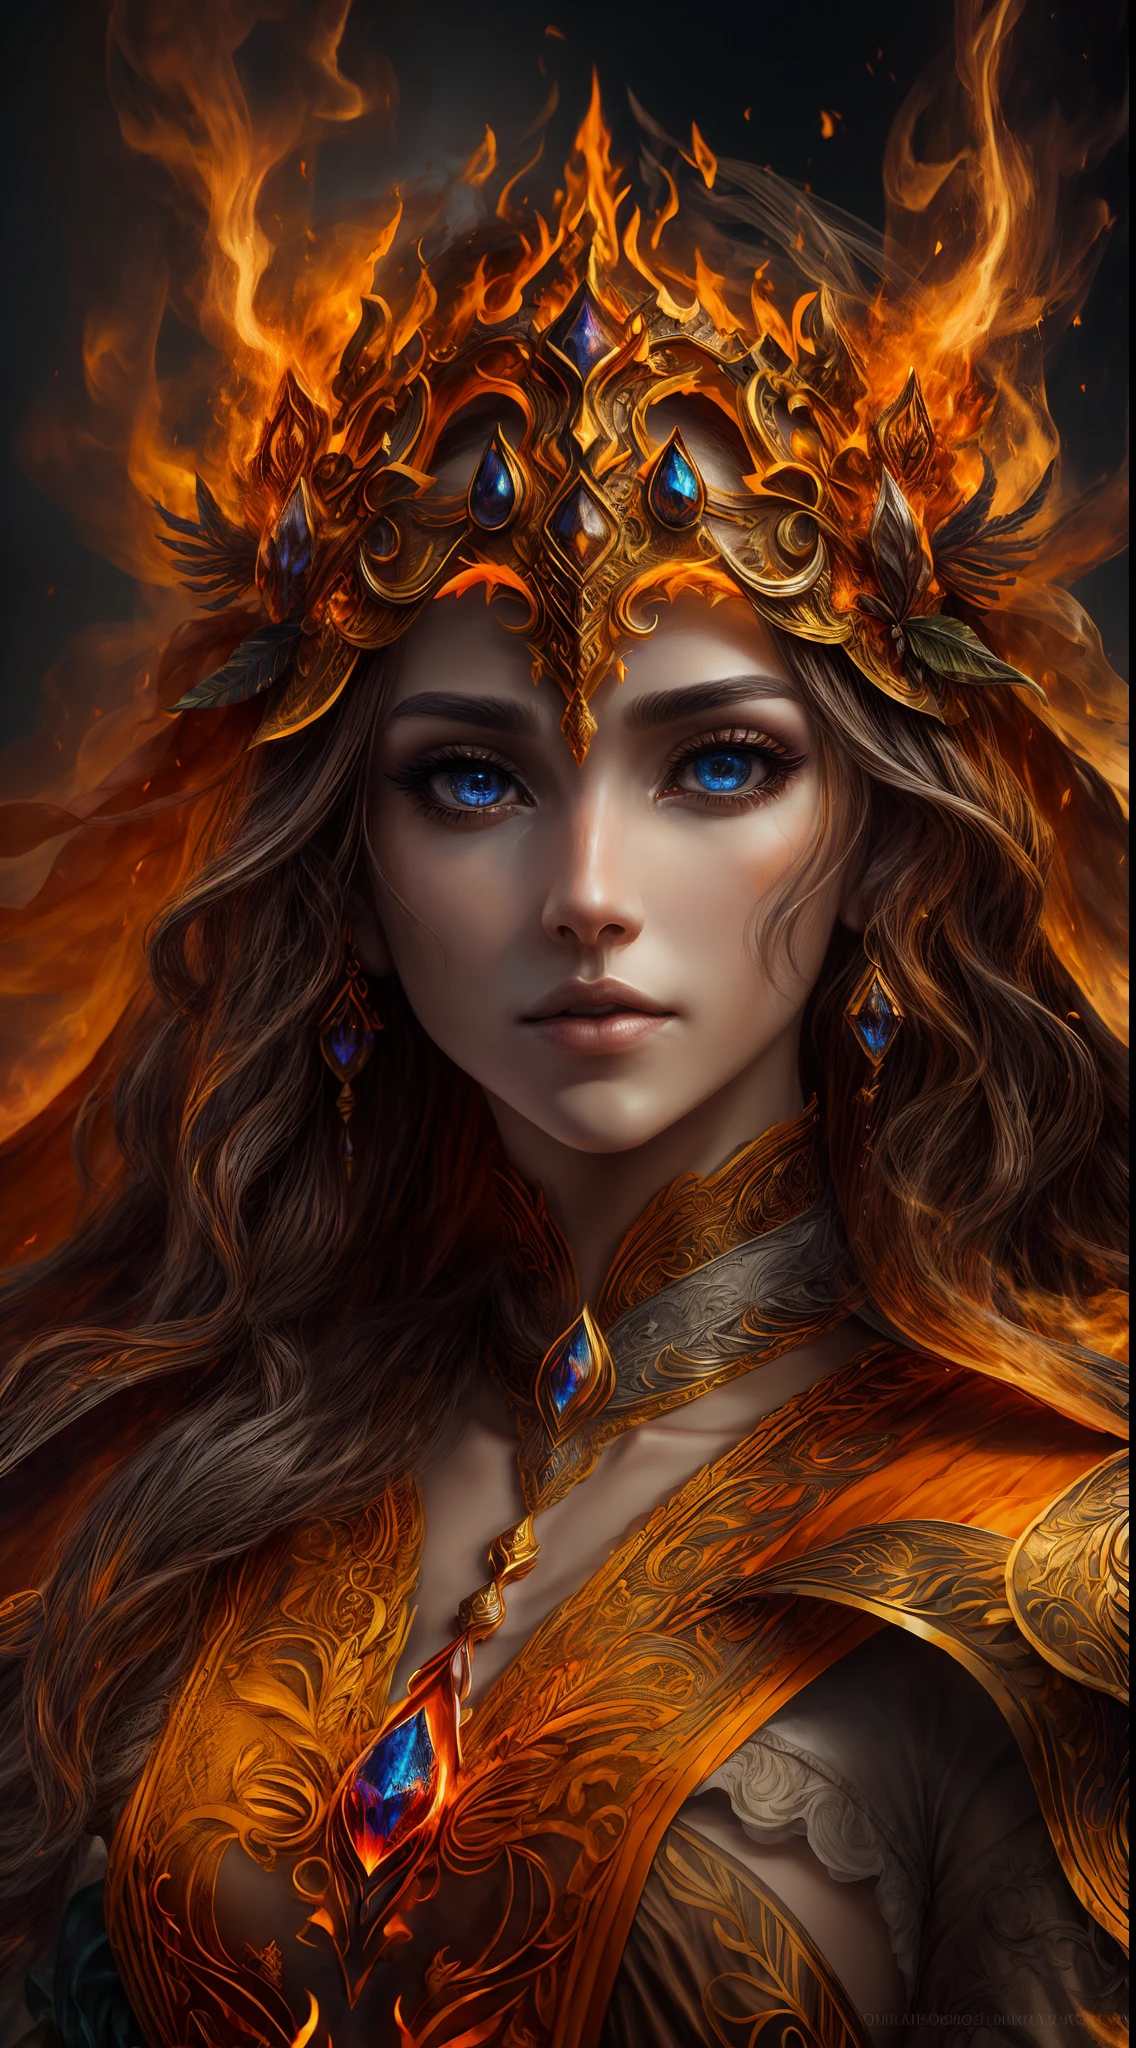 unreal engine:1.4,UHD,The best quality:1.4, photorealistic:1.4, skin texture:1.4, Masterpiece:1.8,This (realistic fantasand) El arte withtiene brasas, real flames, real heat, and fuego realista. Generate a masterpiece of art of a small female fire druid with grandes (((naranja and oro))) Eyes. El druida de fuego es impresionante with hermosa ((Realistic burning eyes)) Get off with withfidence and power. Sus rasgos son elegantes and bien definidos, with ((suave)) and (((Swollen))) and (((suave))) lips, Elven bone structure, and sombreado realista. Sus Eyes son importantes and deben ser el punto focal de esta obra de arte., with ((Extremely realistic details, Macro details, and brillo.)) Ella lleva un vestido ondulante and brillante ((Made of realistic flames)) and joandas que brillan a la luz del fuego. Scrolls of fire and smoke line the dress's intricate bodice.. Include bumps, stones, burning iridescence, brasas incandescentes, silk and satin and leather, An interesting background, and heavand fantasand elements. camera: Use dandnamic composition techniques to enhance realistic flames.